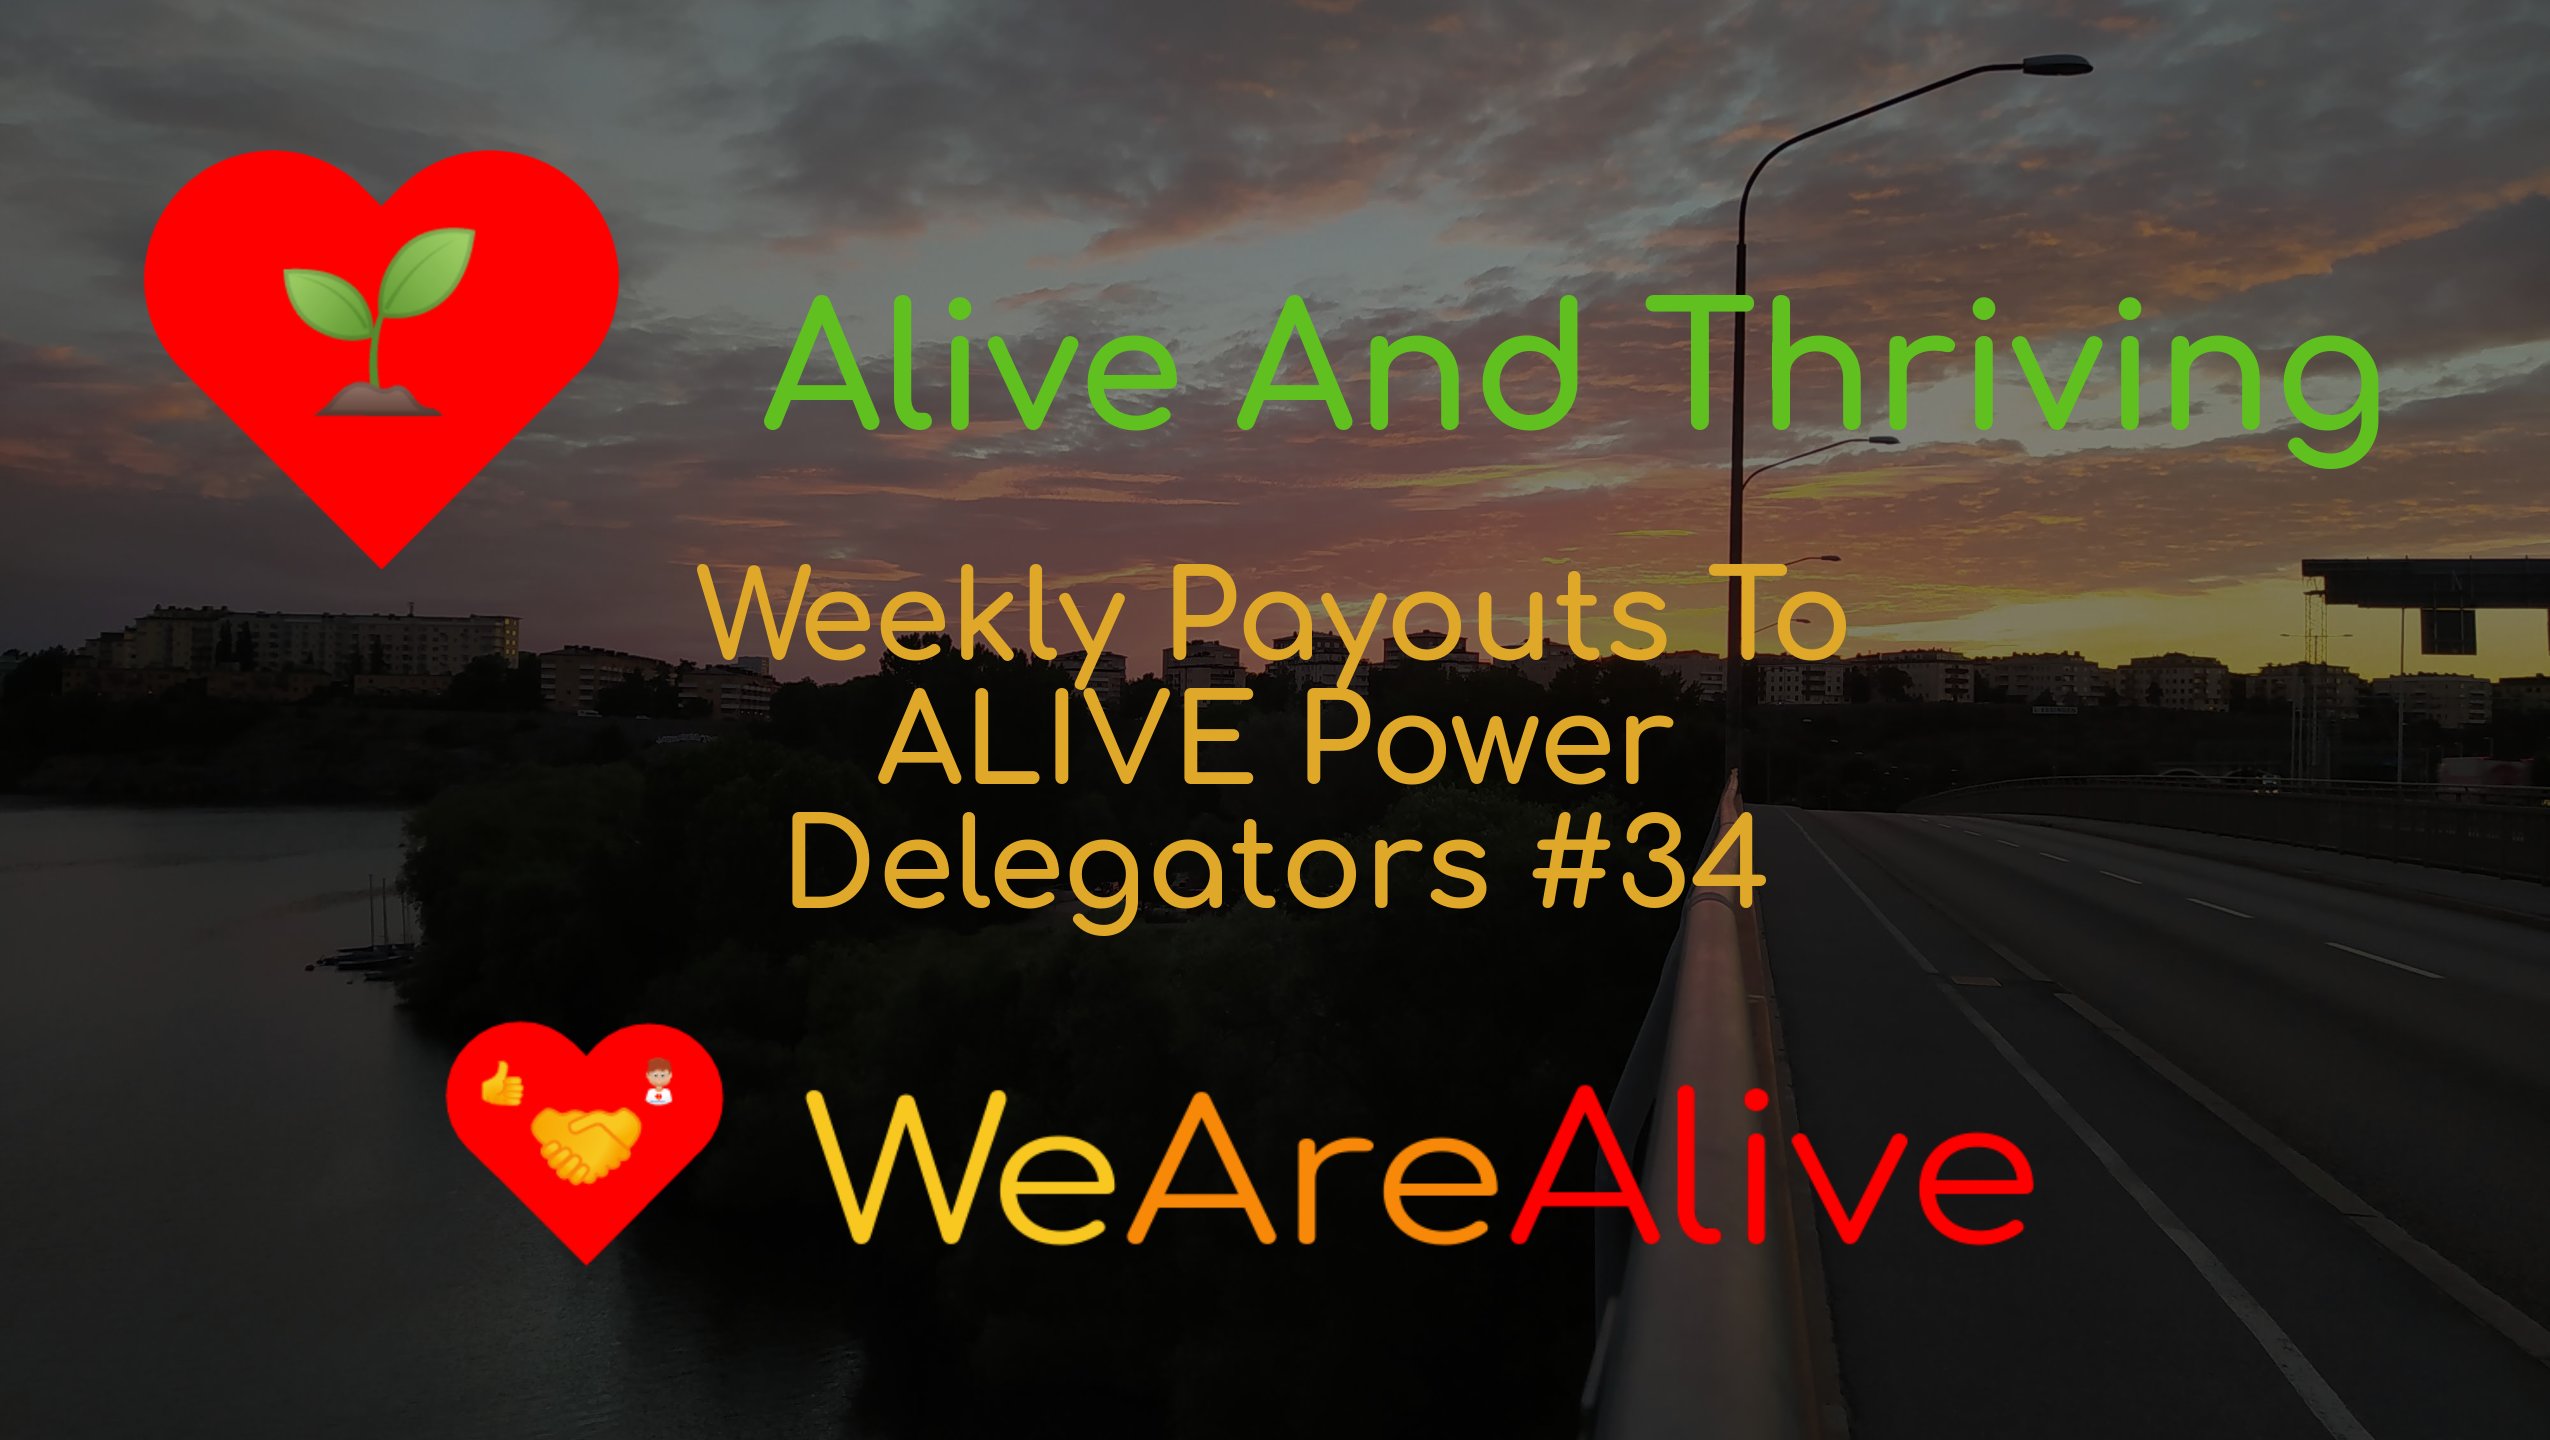 @wearealive/alive-and-thriving-weekly-payouts-to-alive-power-delegators-34